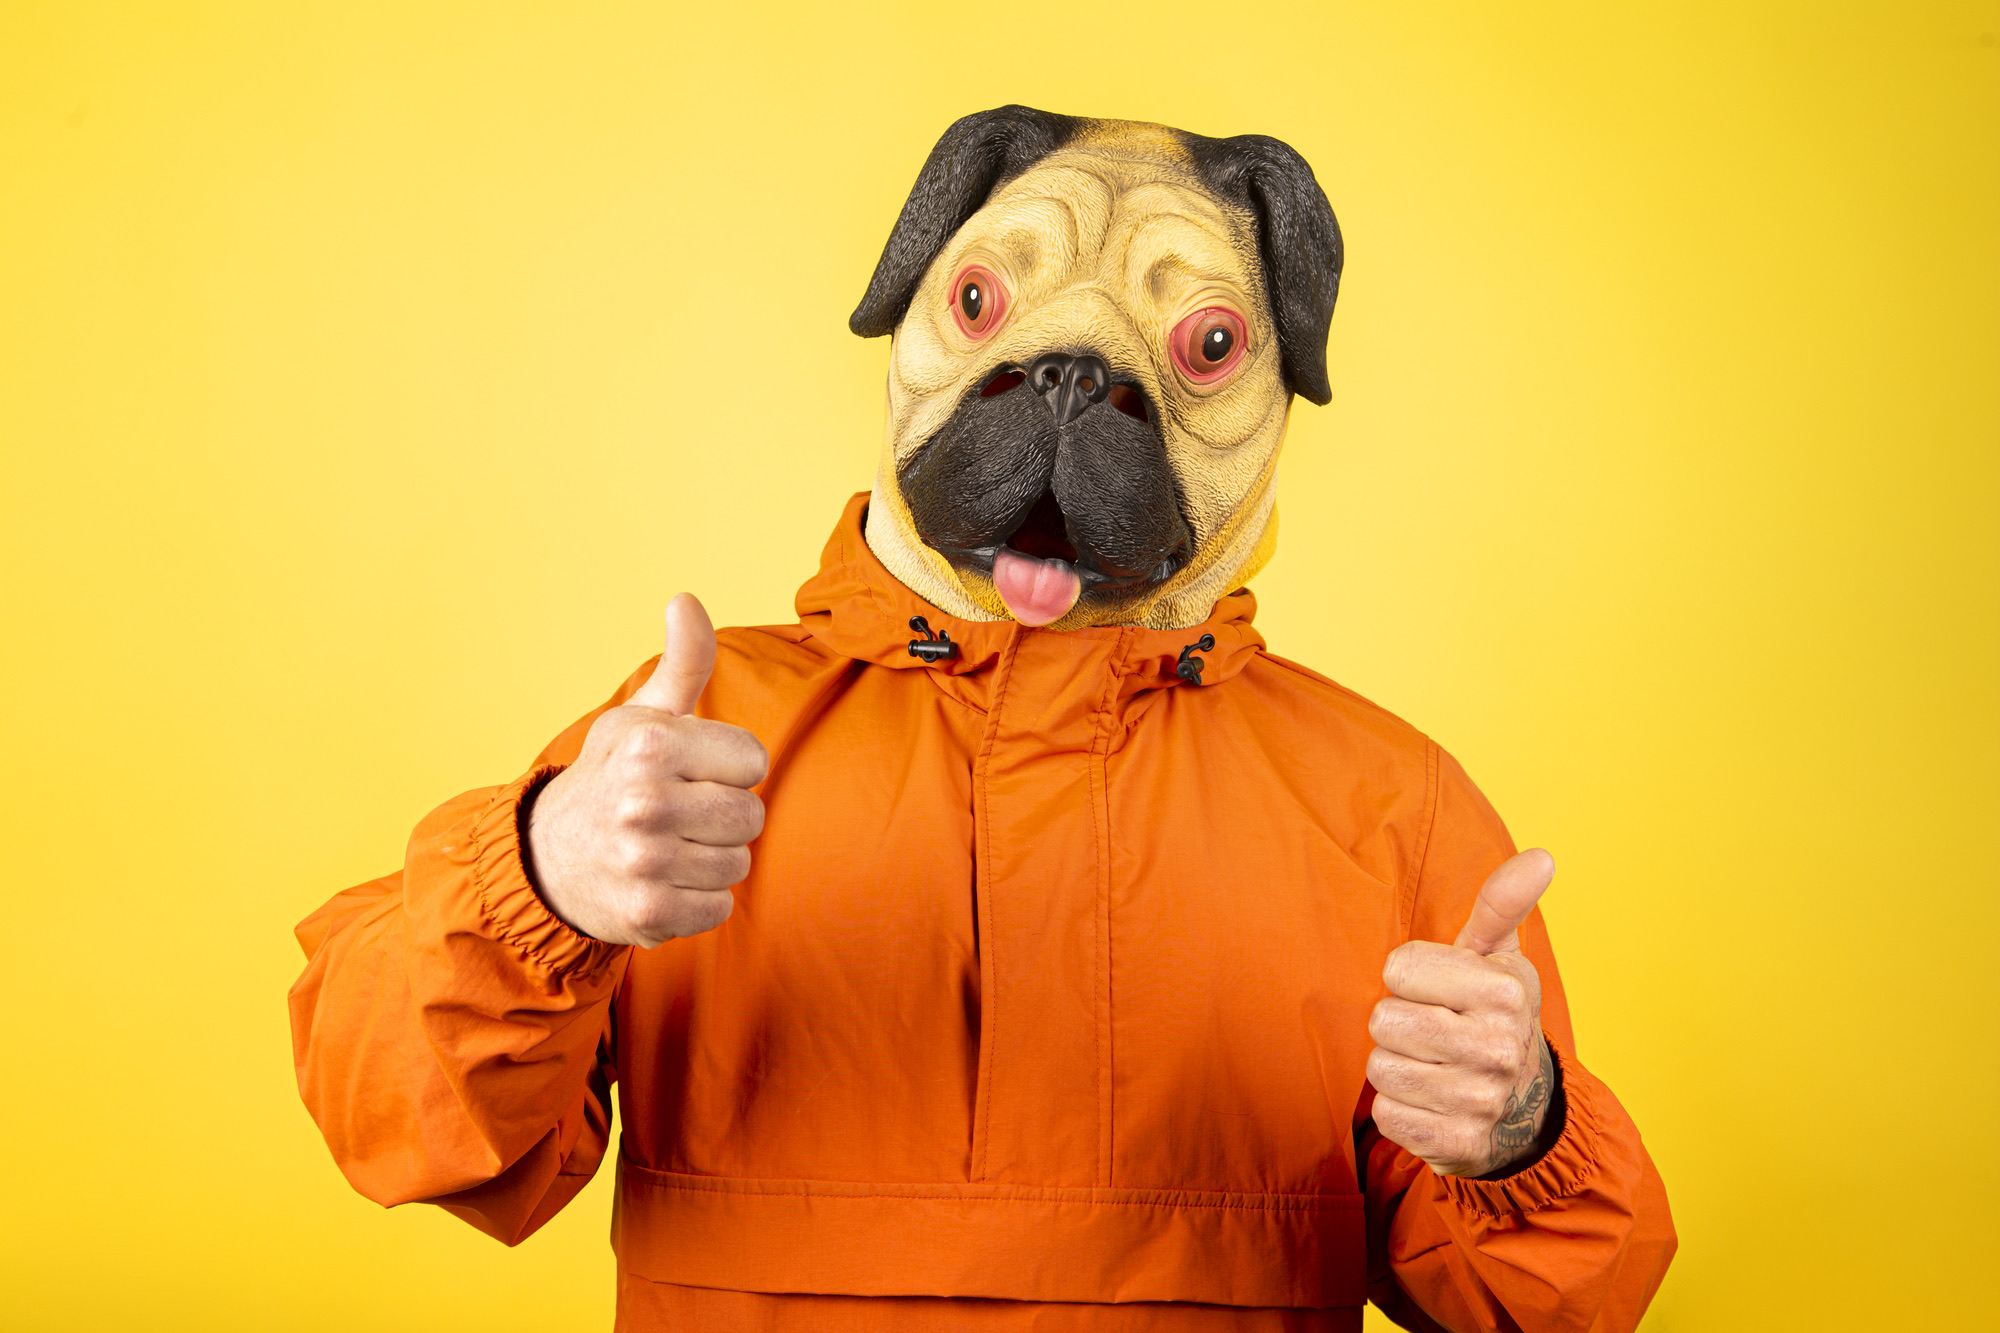 Man with pug dog mask isolated on a yellow background with gesture of approval.